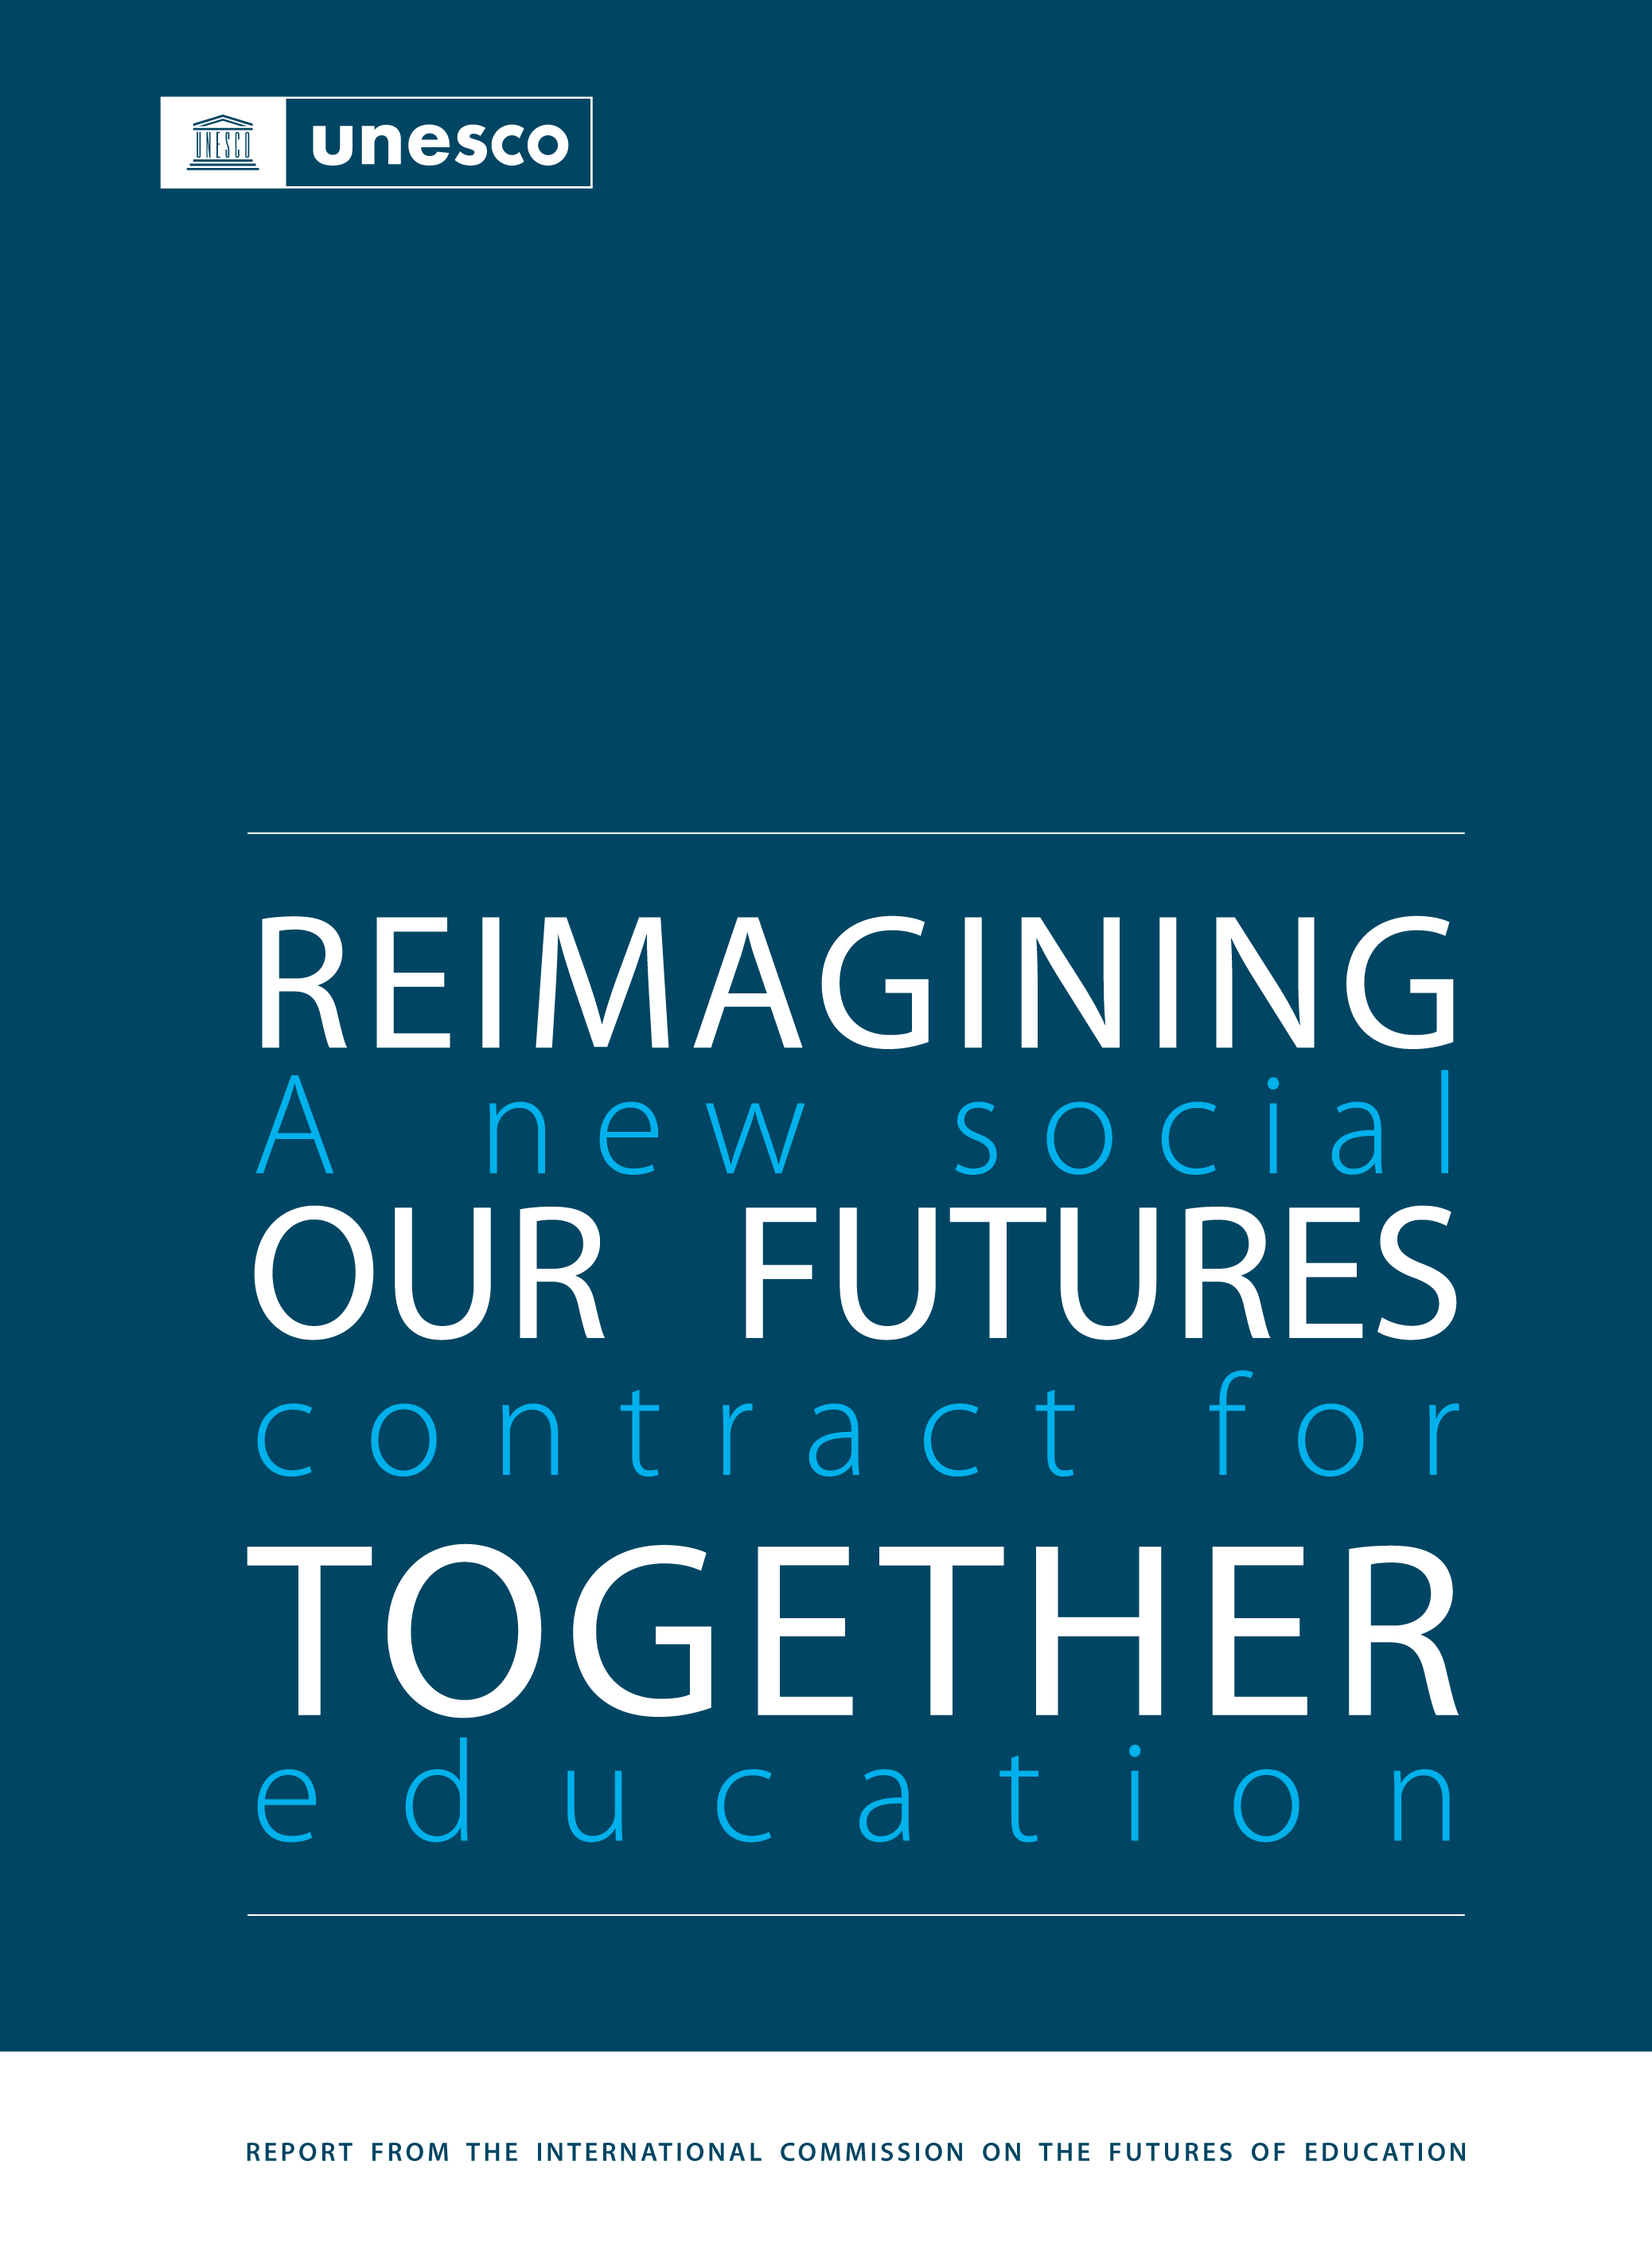 image of Towards more equitable educational futures